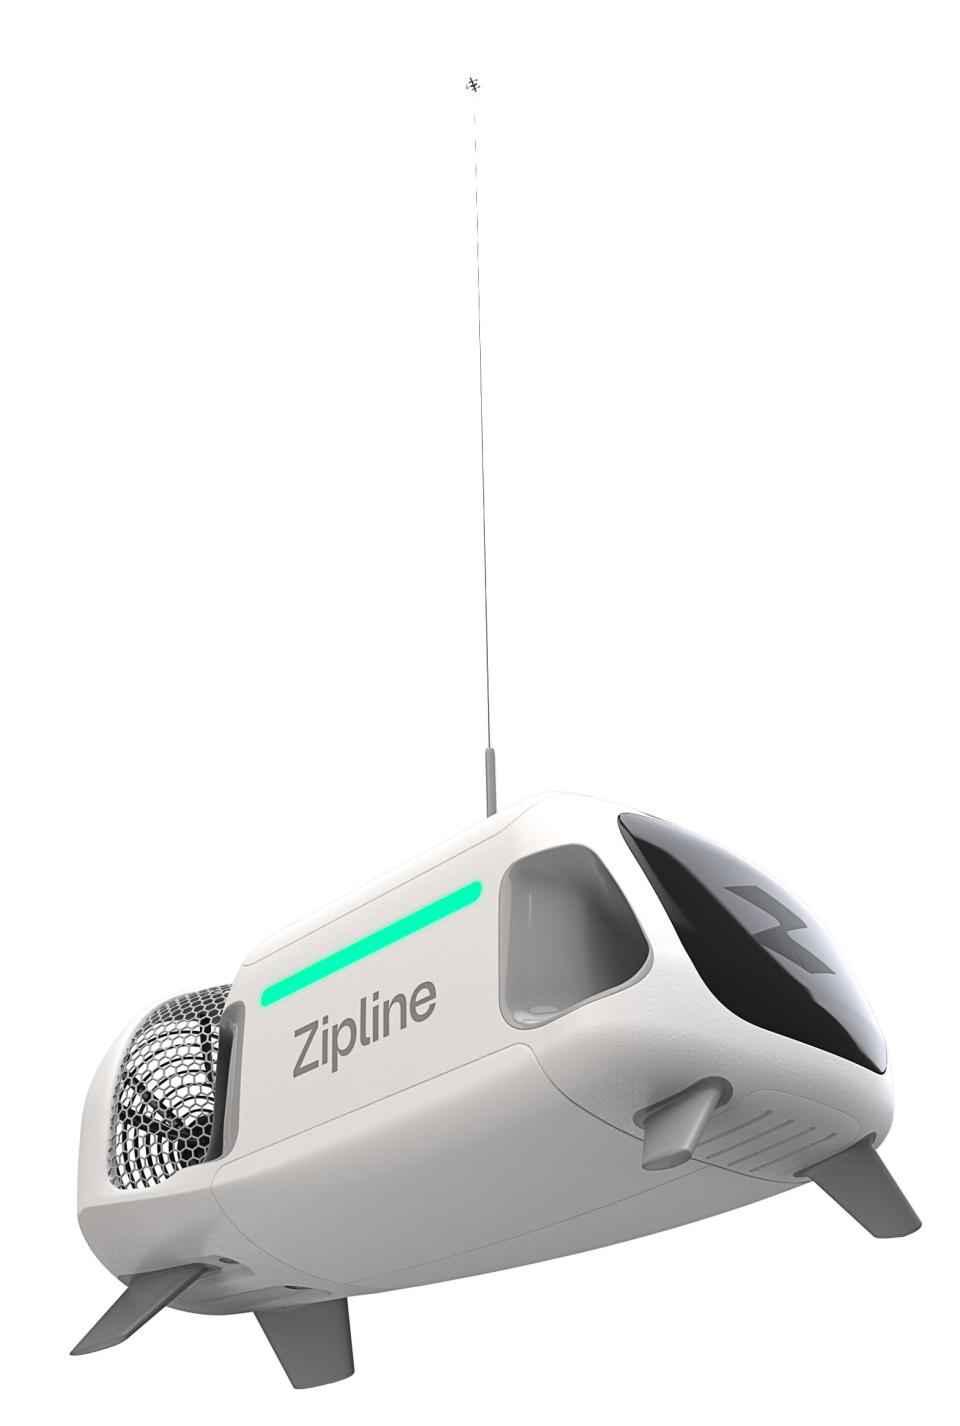 WellSpan is partnering with Zipline, the world’s largest autonomous delivery service, to use Zipline’s electric, autonomous drones to transport prescriptions directly to patients’ homes and move lab samples and medical products between its facilities.